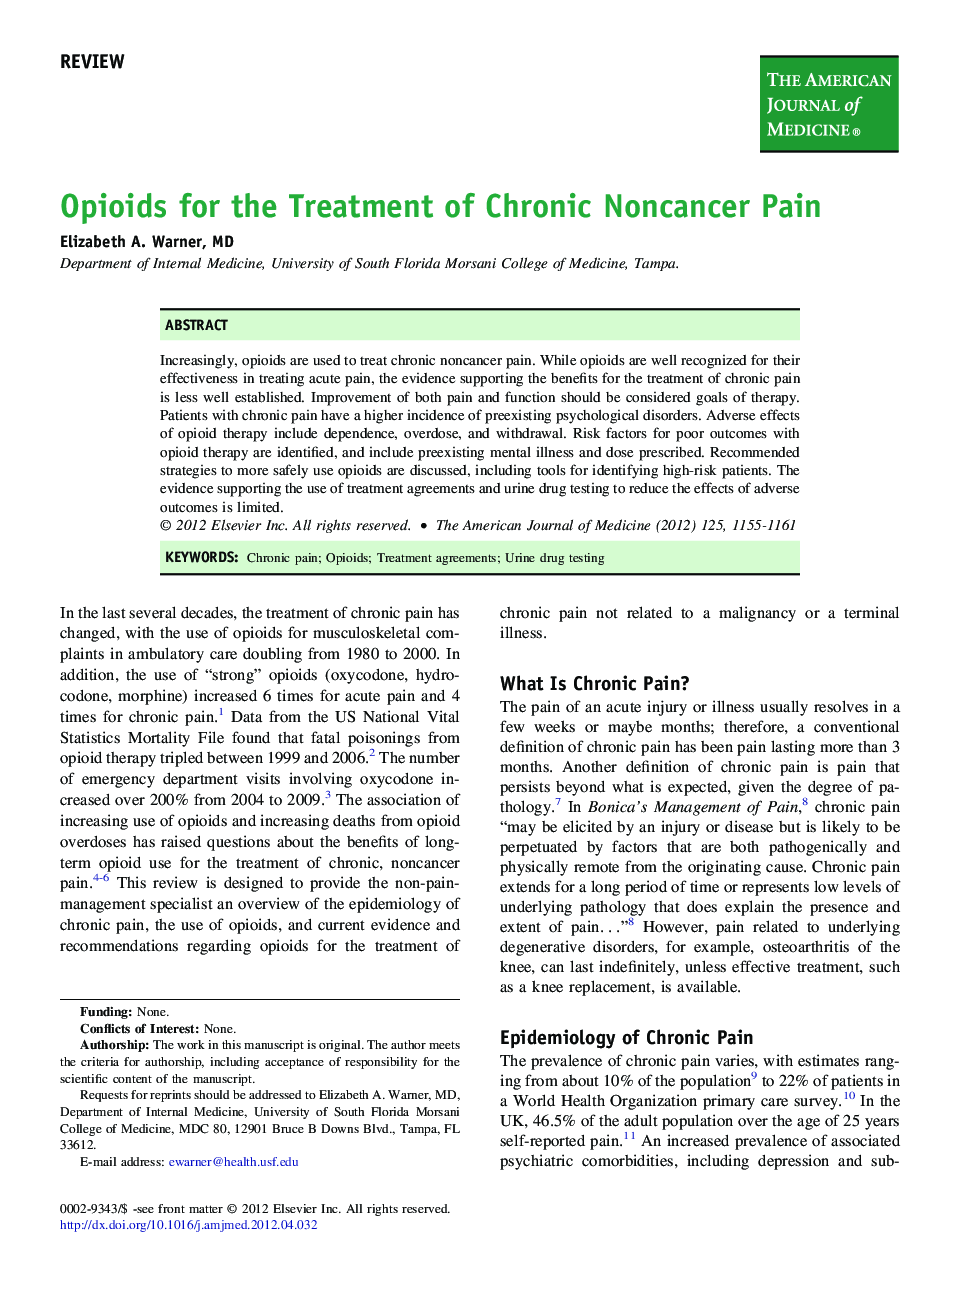 Opioids for the Treatment of Chronic Noncancer Pain 